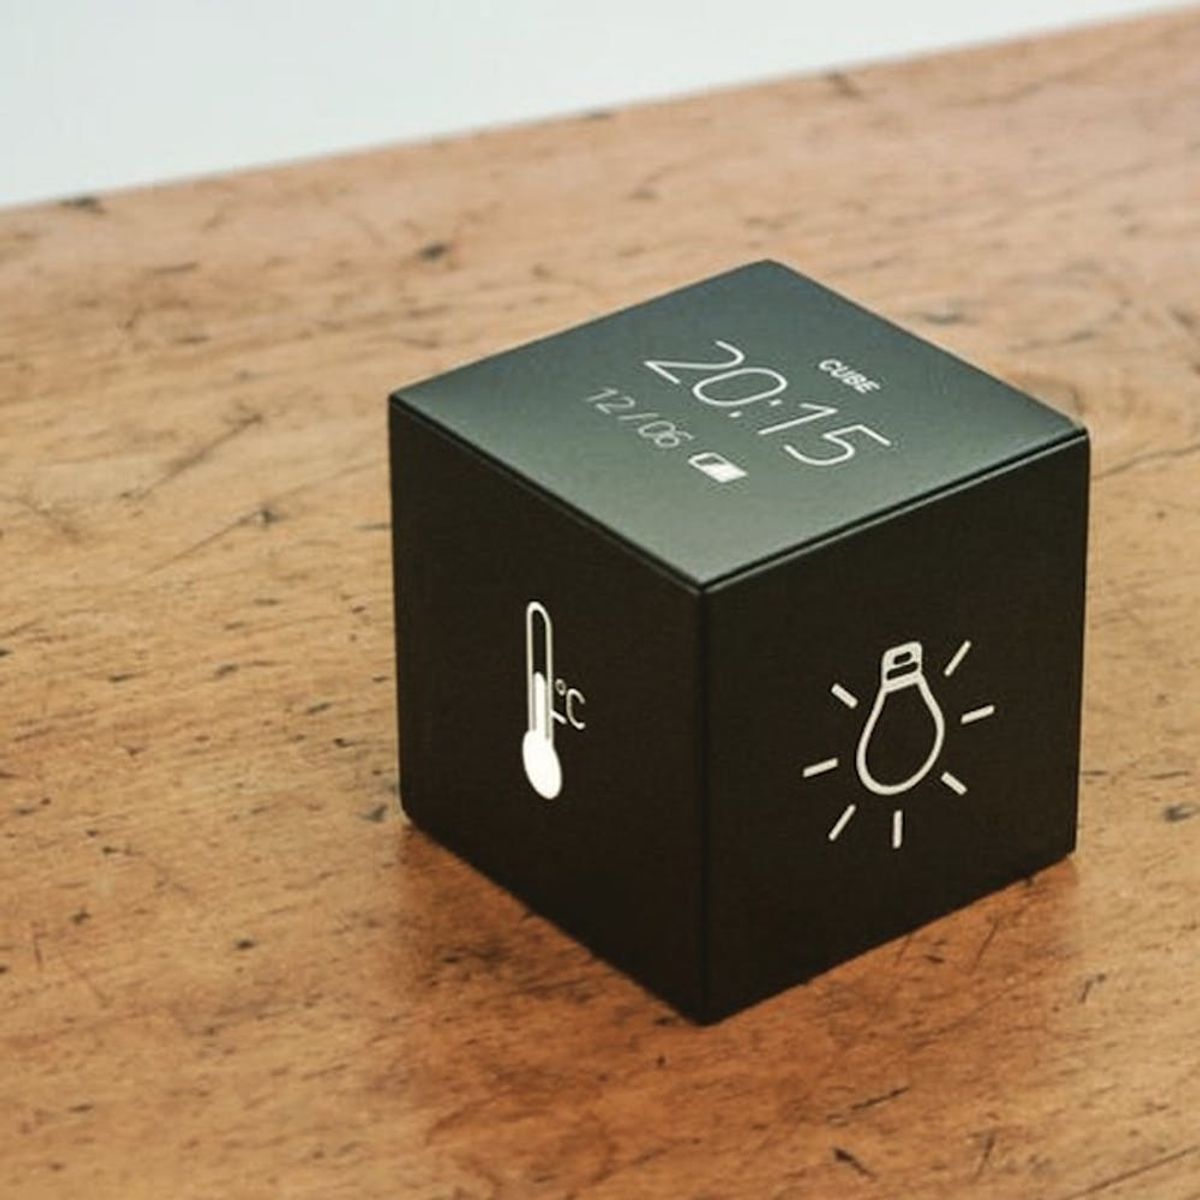 This Tiny Box Can Control Your Life — in a Good Way